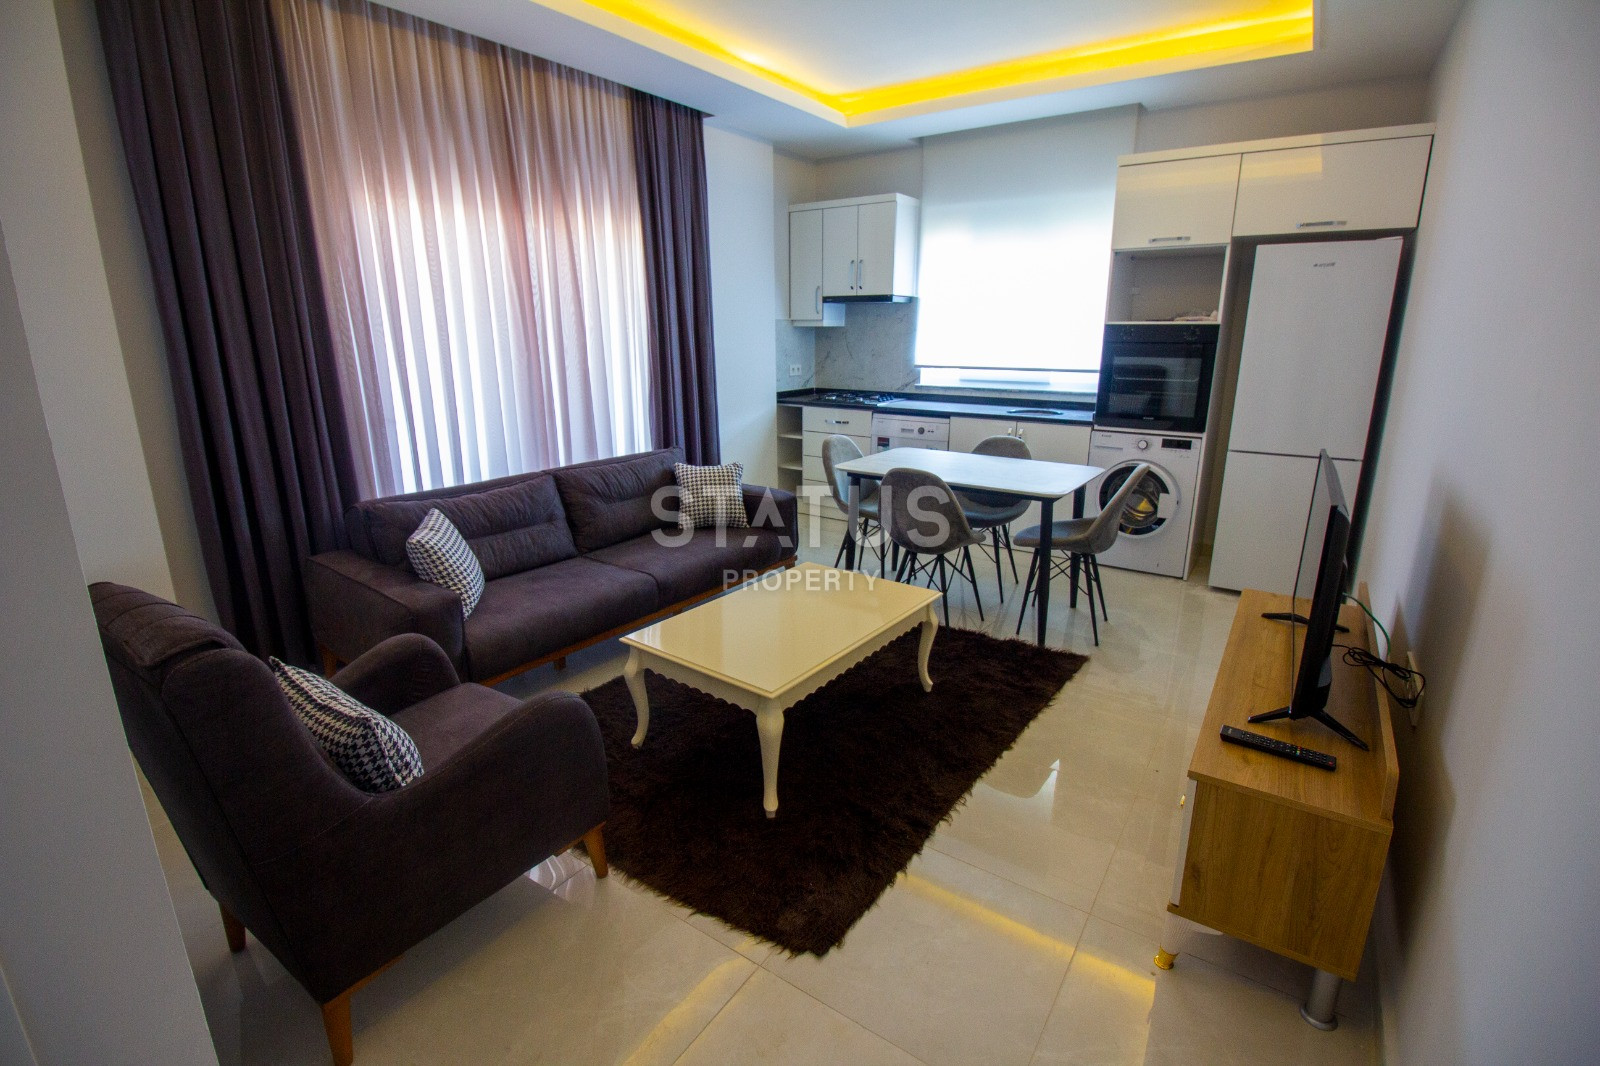 For sale is a 1+1 layout apartment in a new building in the Oba area, 47 m2. фото 1